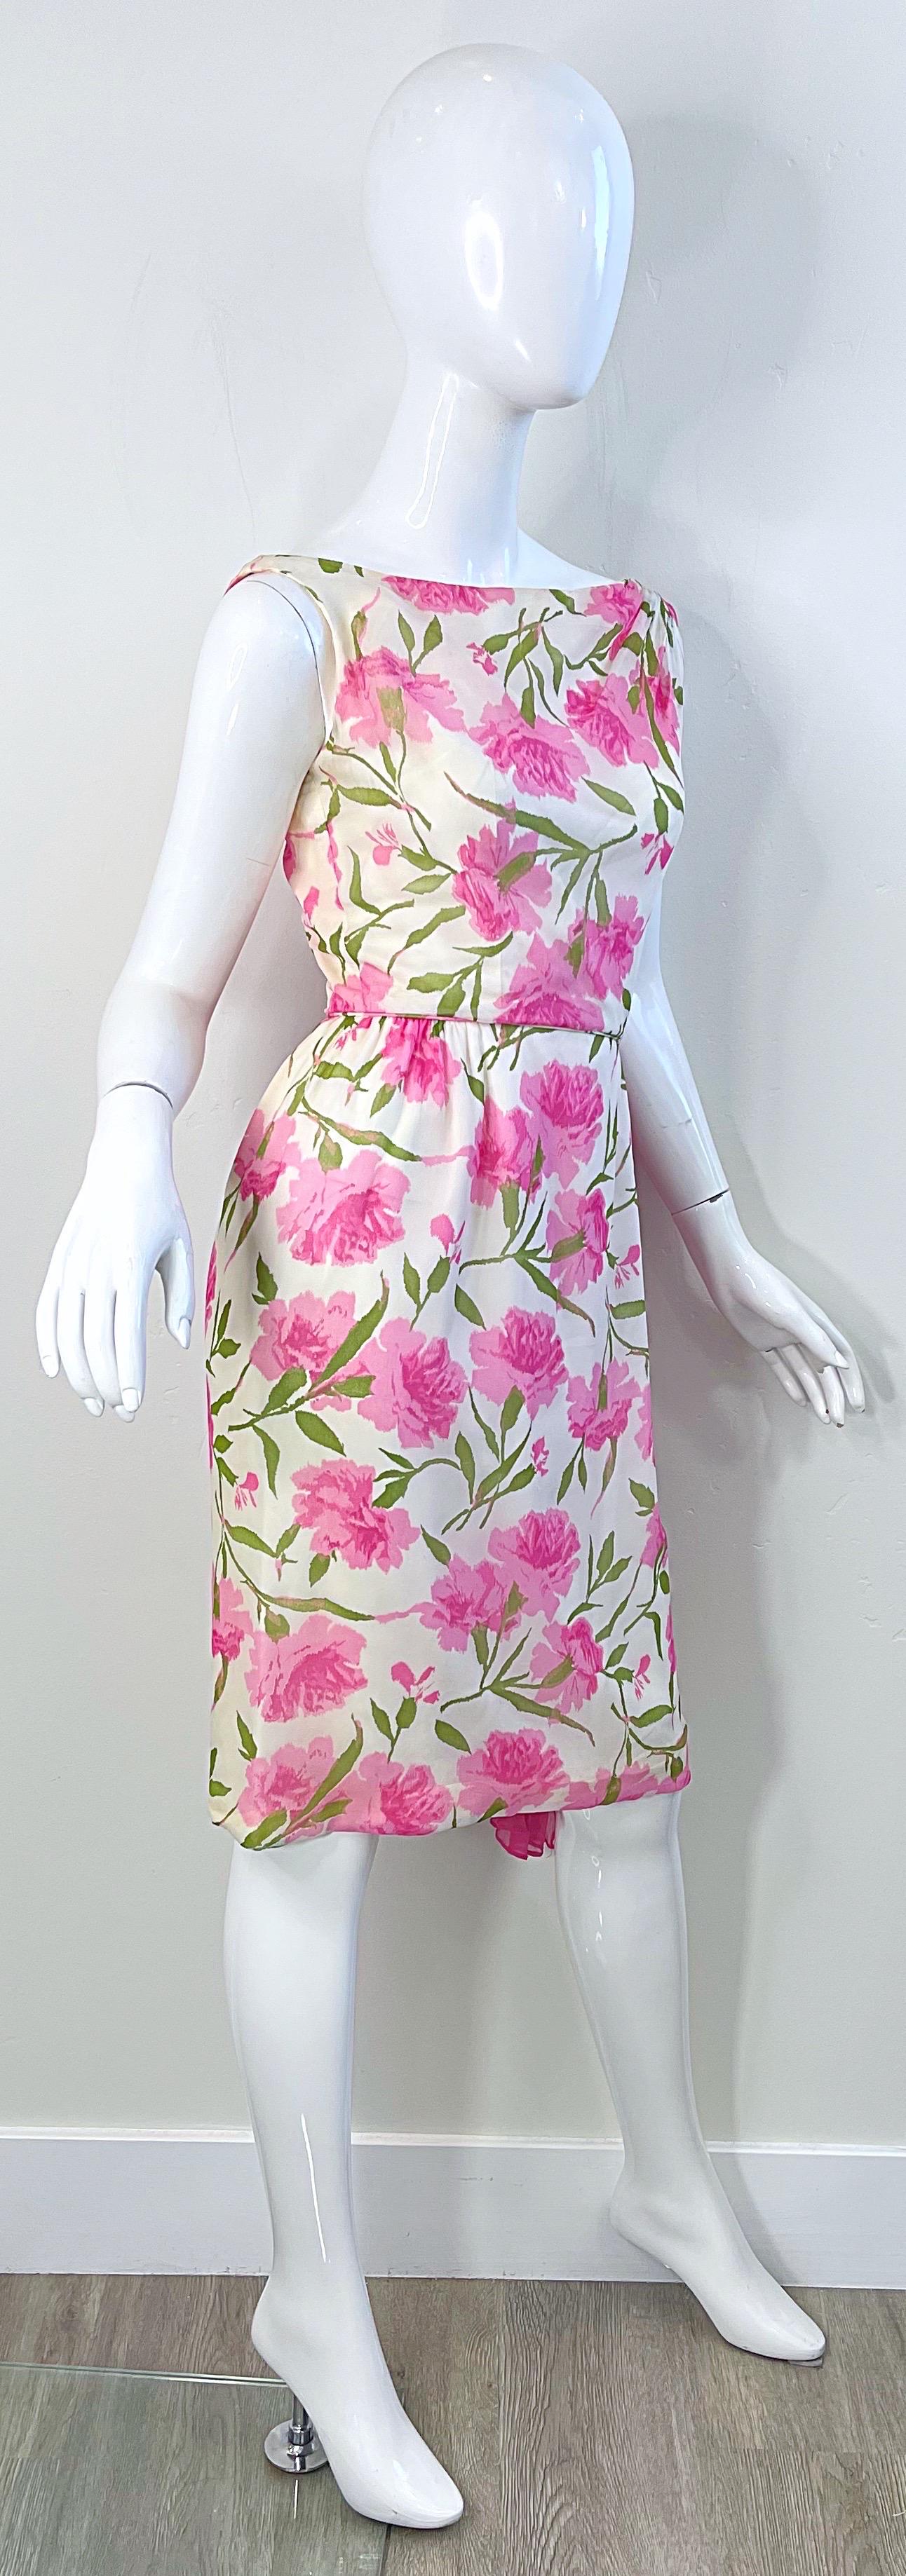 1960s Demi Couture Silk Chiffon Flower Print Pink + Green Vintage 60s Dress For Sale 6